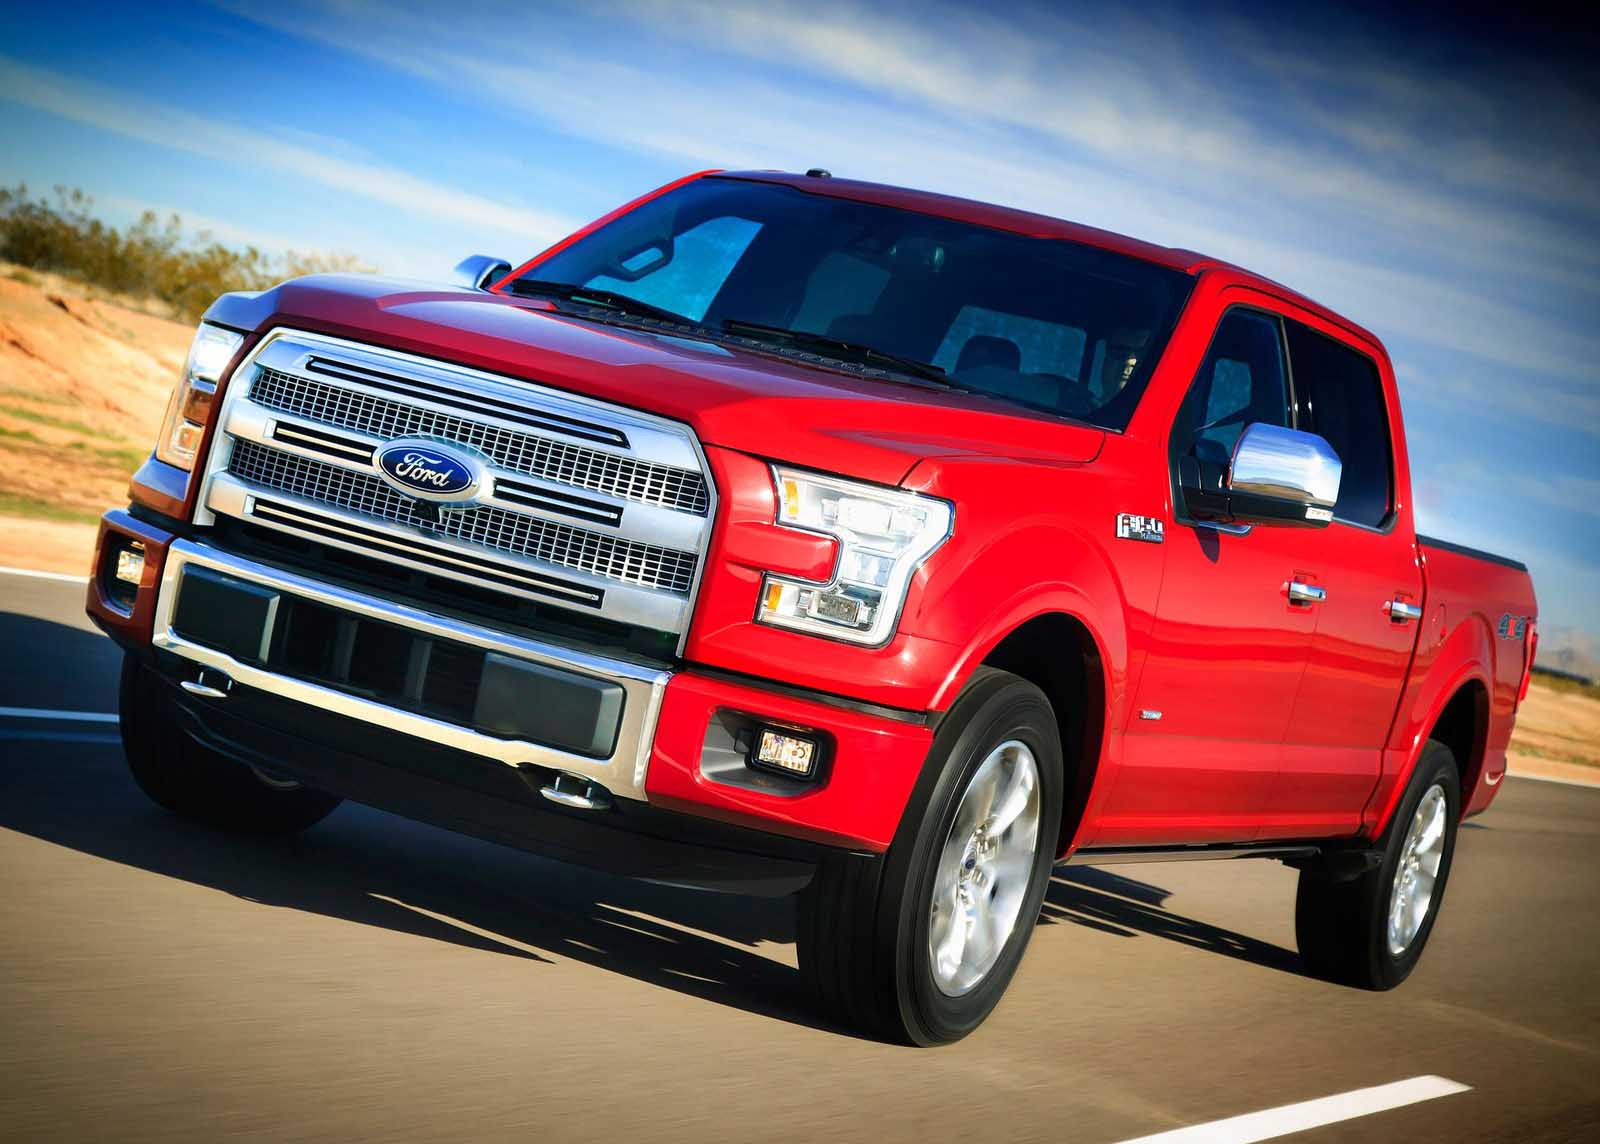 2015 Ford F 150 HD Wallpaper - HD Backgrounds